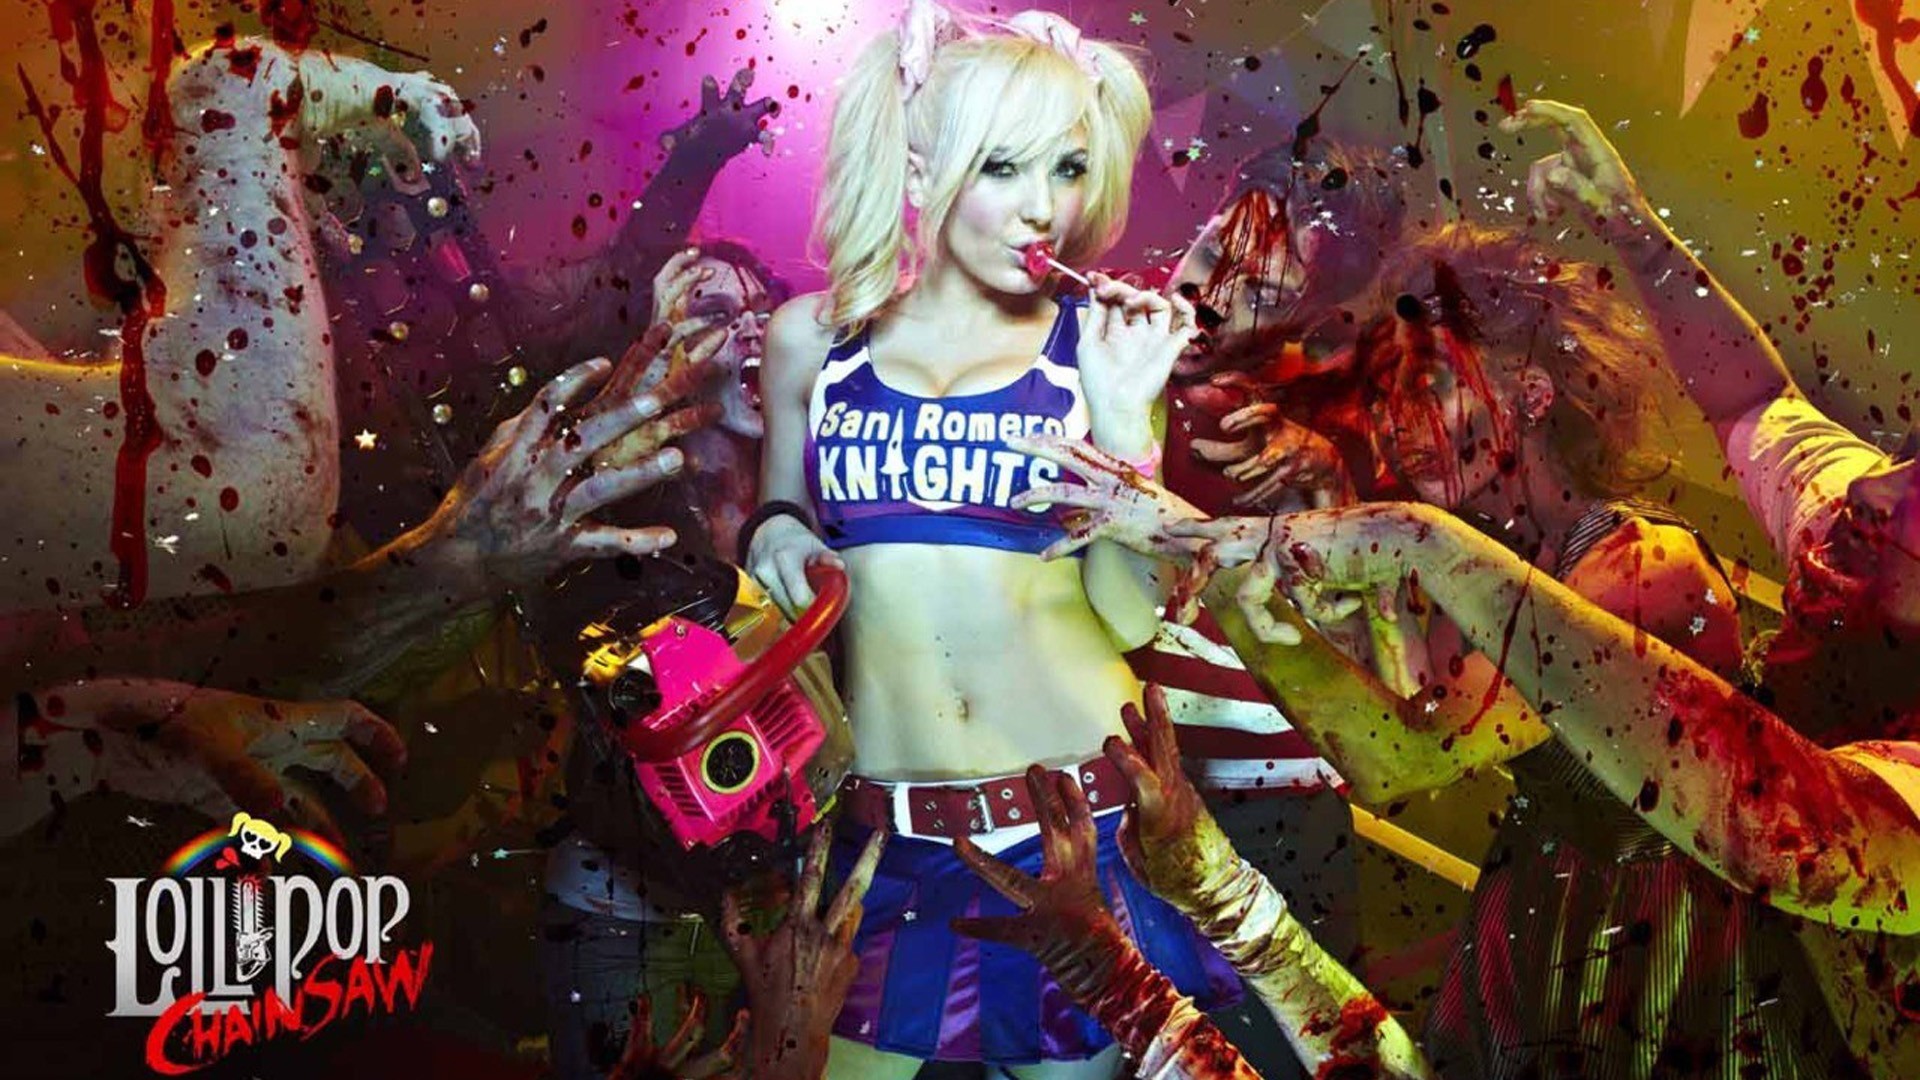 Wallpaper 12 Wallpaper From Lollipop Chainsaw Gamepressure Com Images, Photos, Reviews